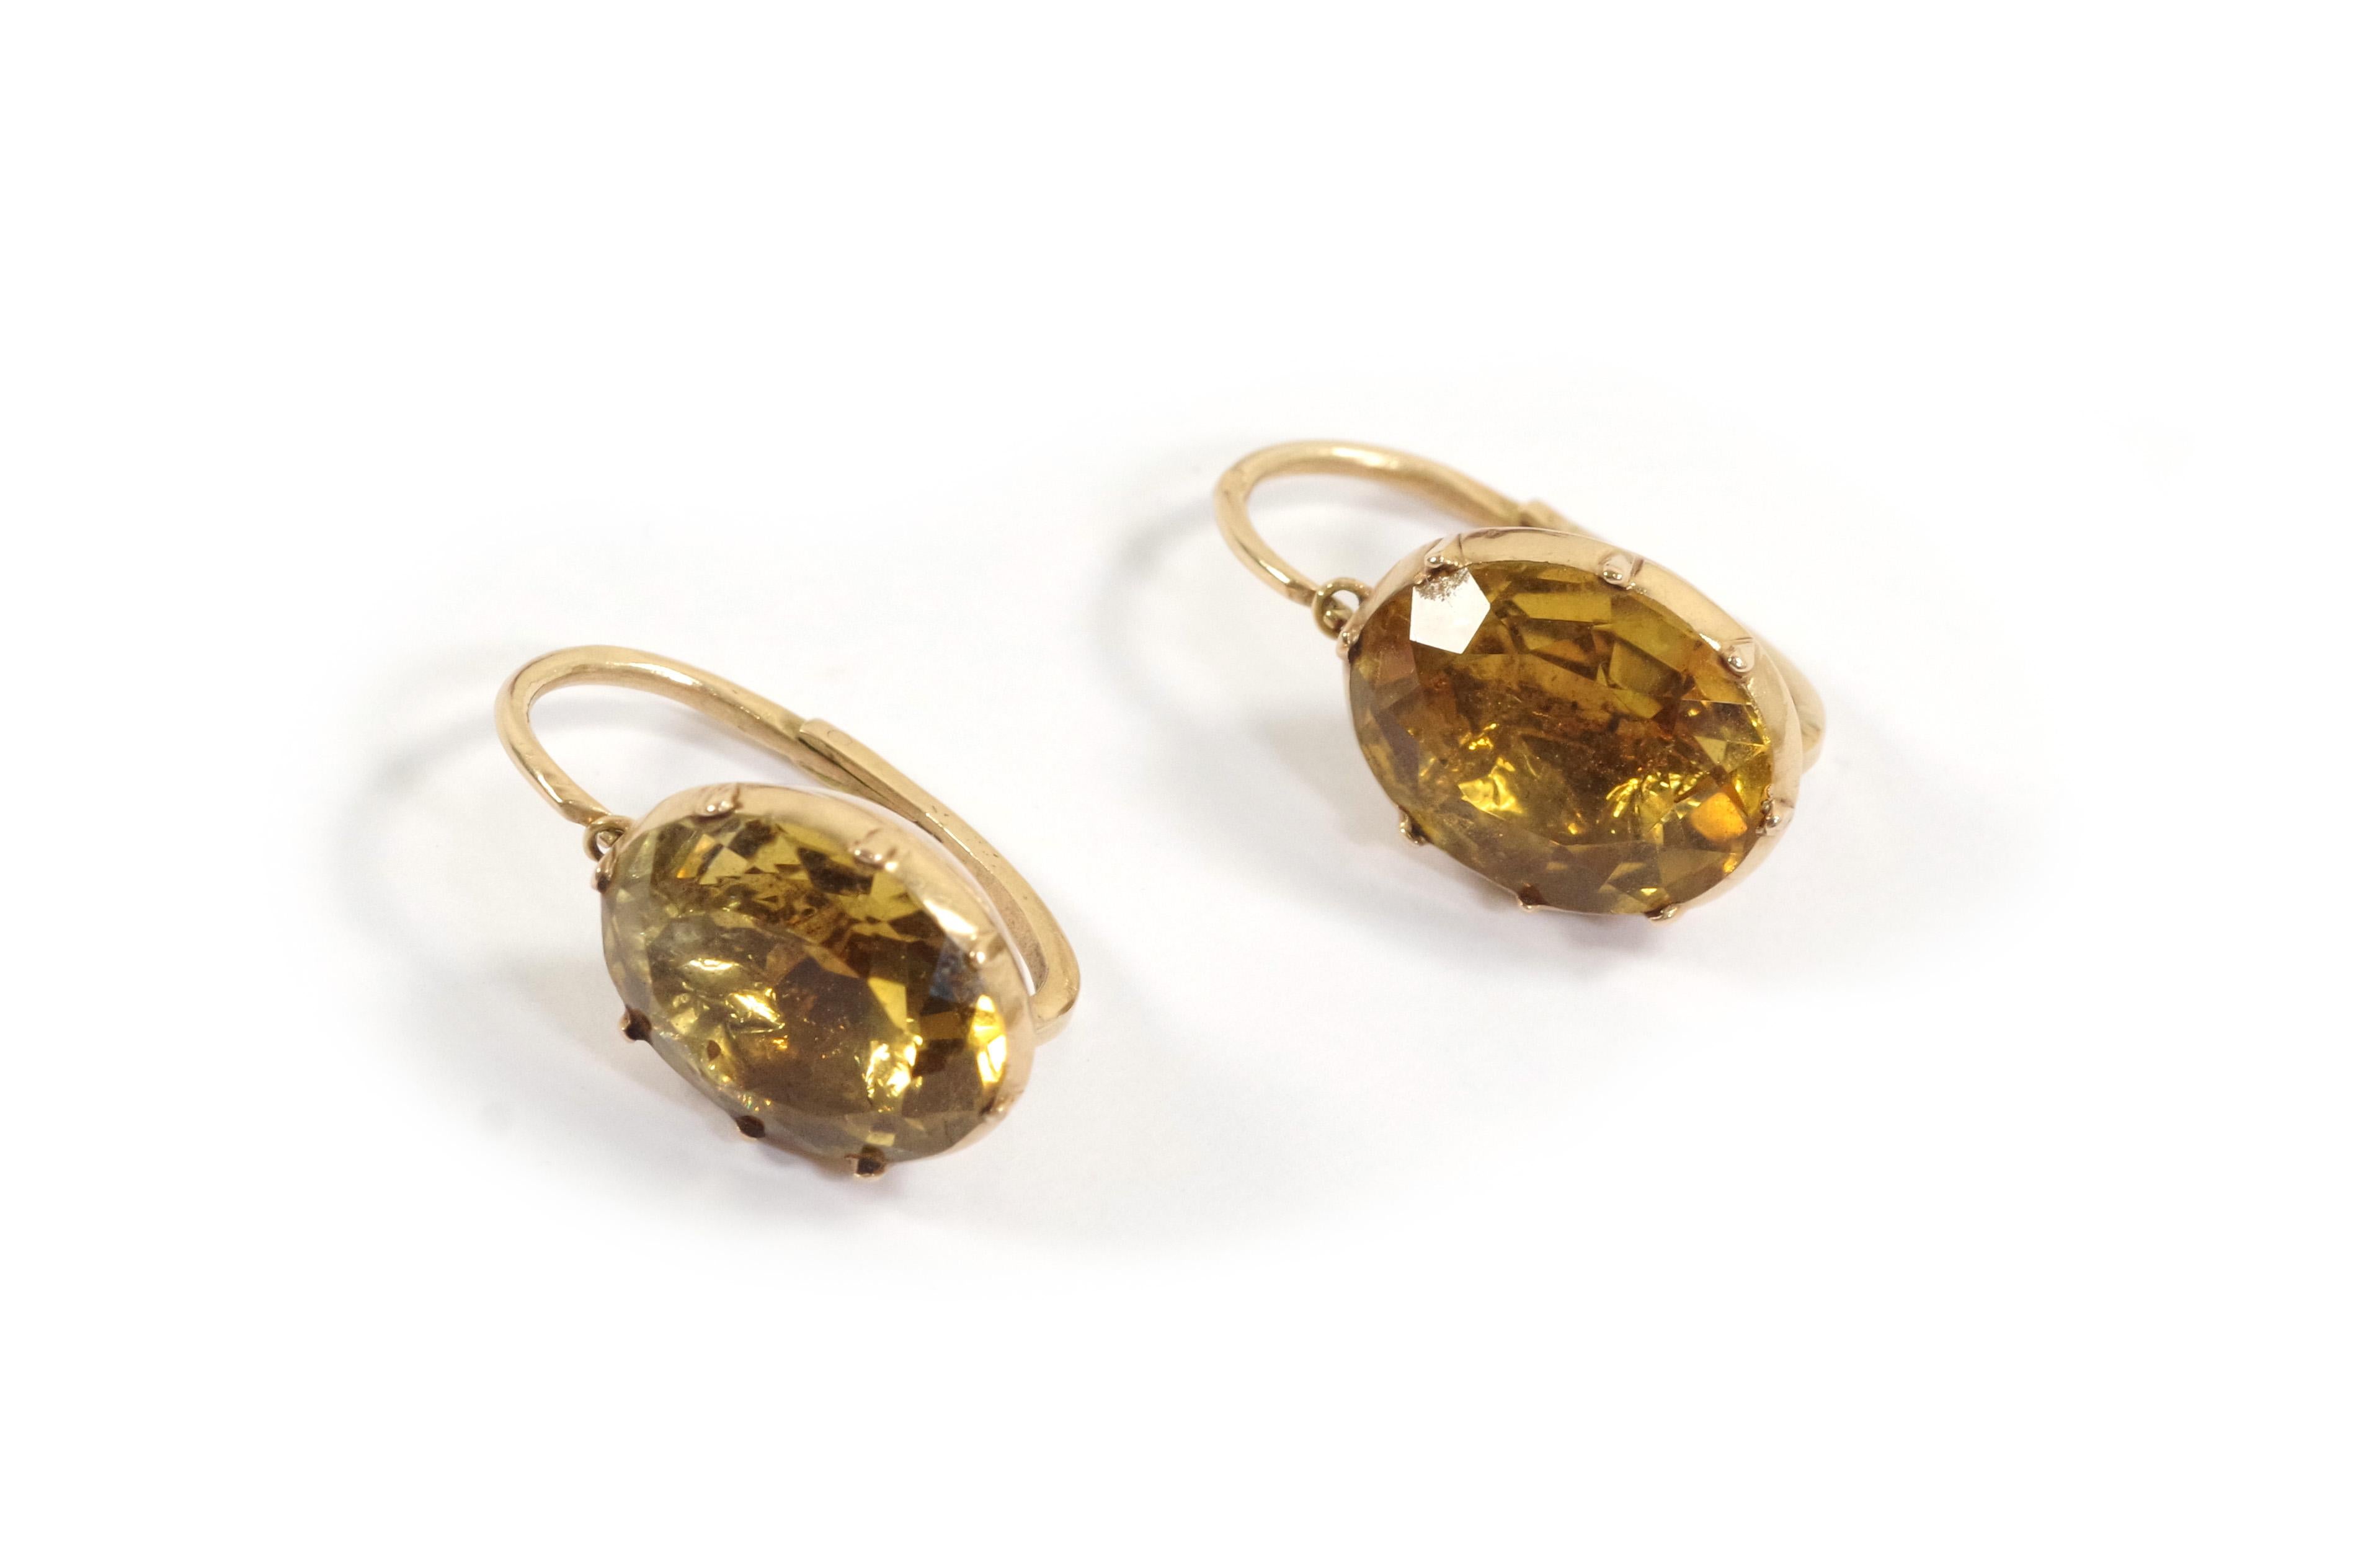 Georgian citrine earrings in 18 karat and 14 karat (585 for the clasp) rose gold. Antique earrings set with large oval faceted citrines. They are closed-set and on a foil, creating a warm, luminous effect. Antique earrings  in very good condition,